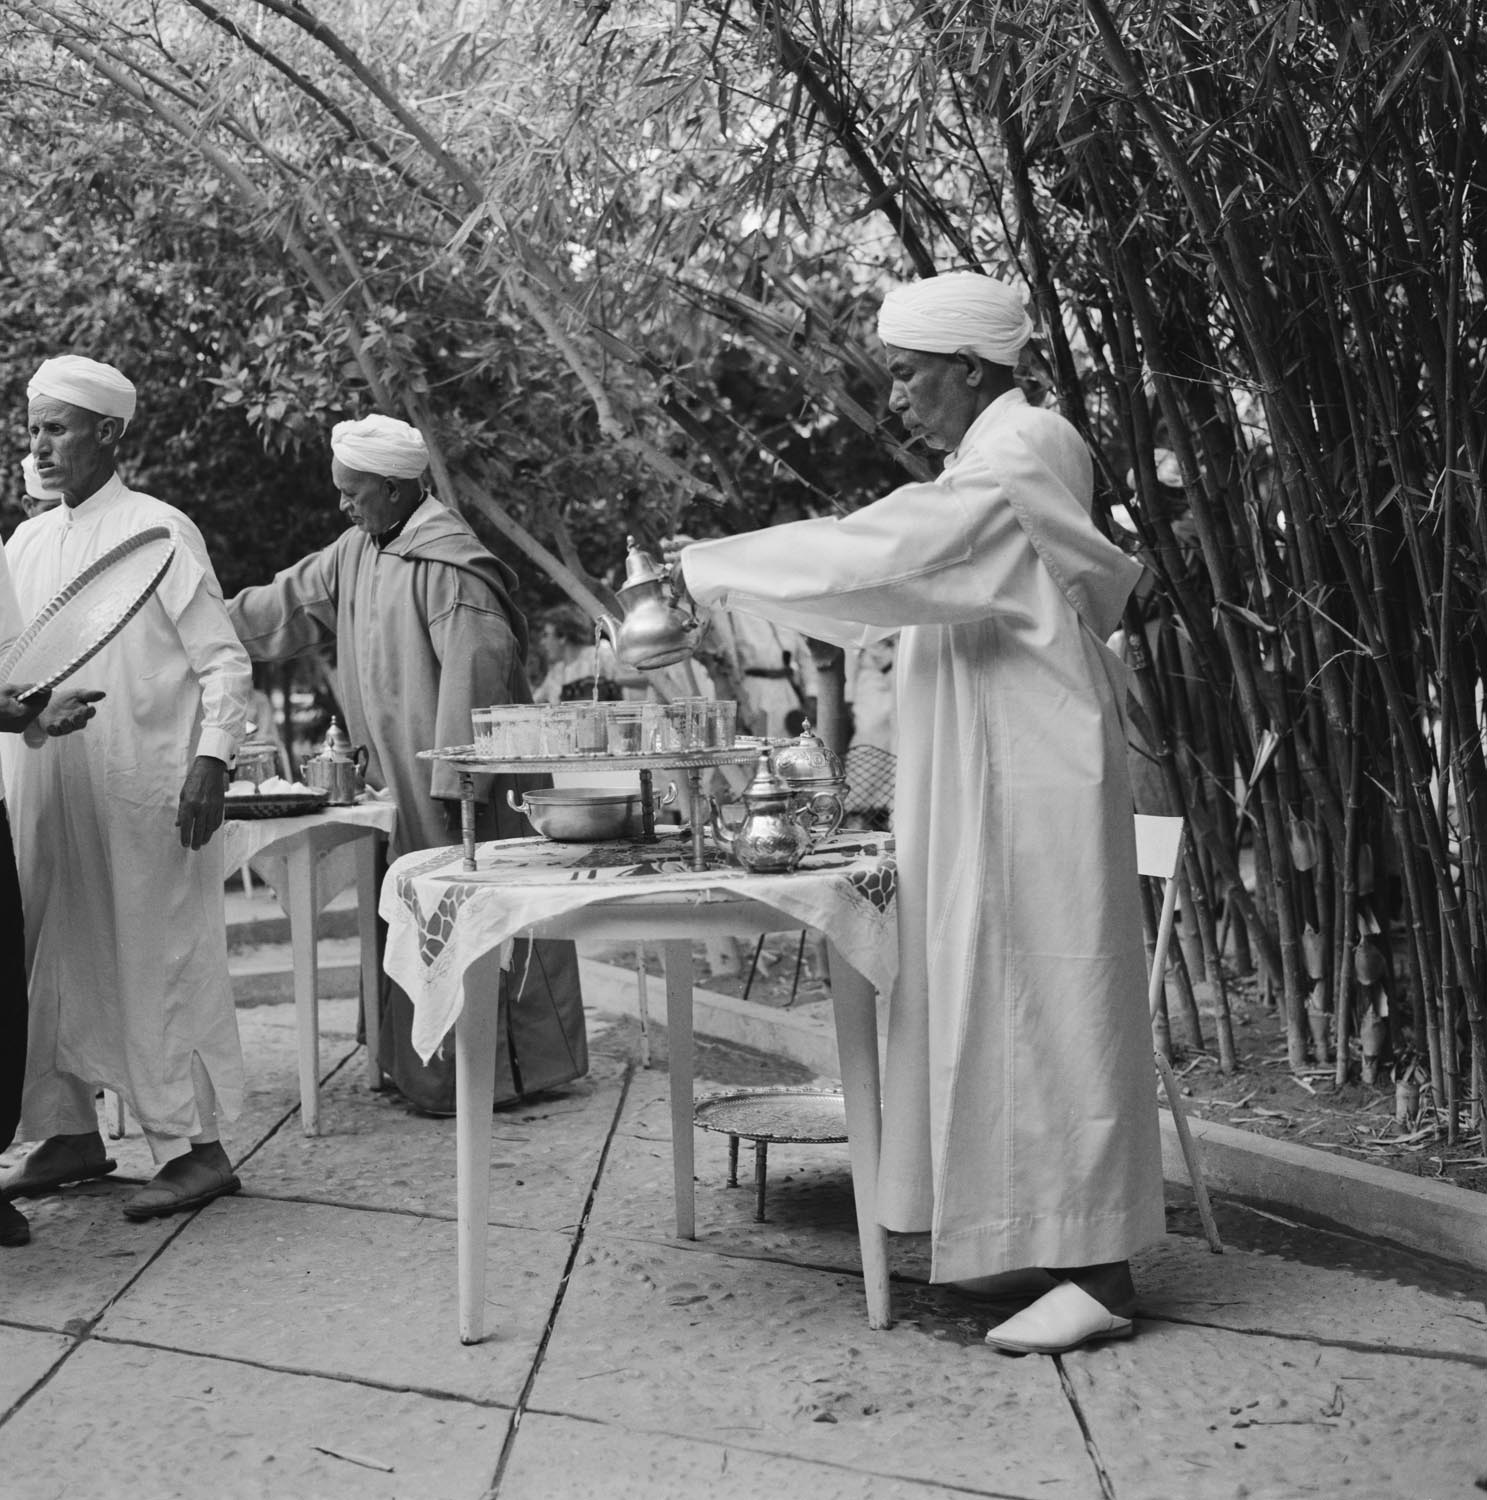 Men in traditional Moroccan clothing preparing and seving tea in a bamboo grove